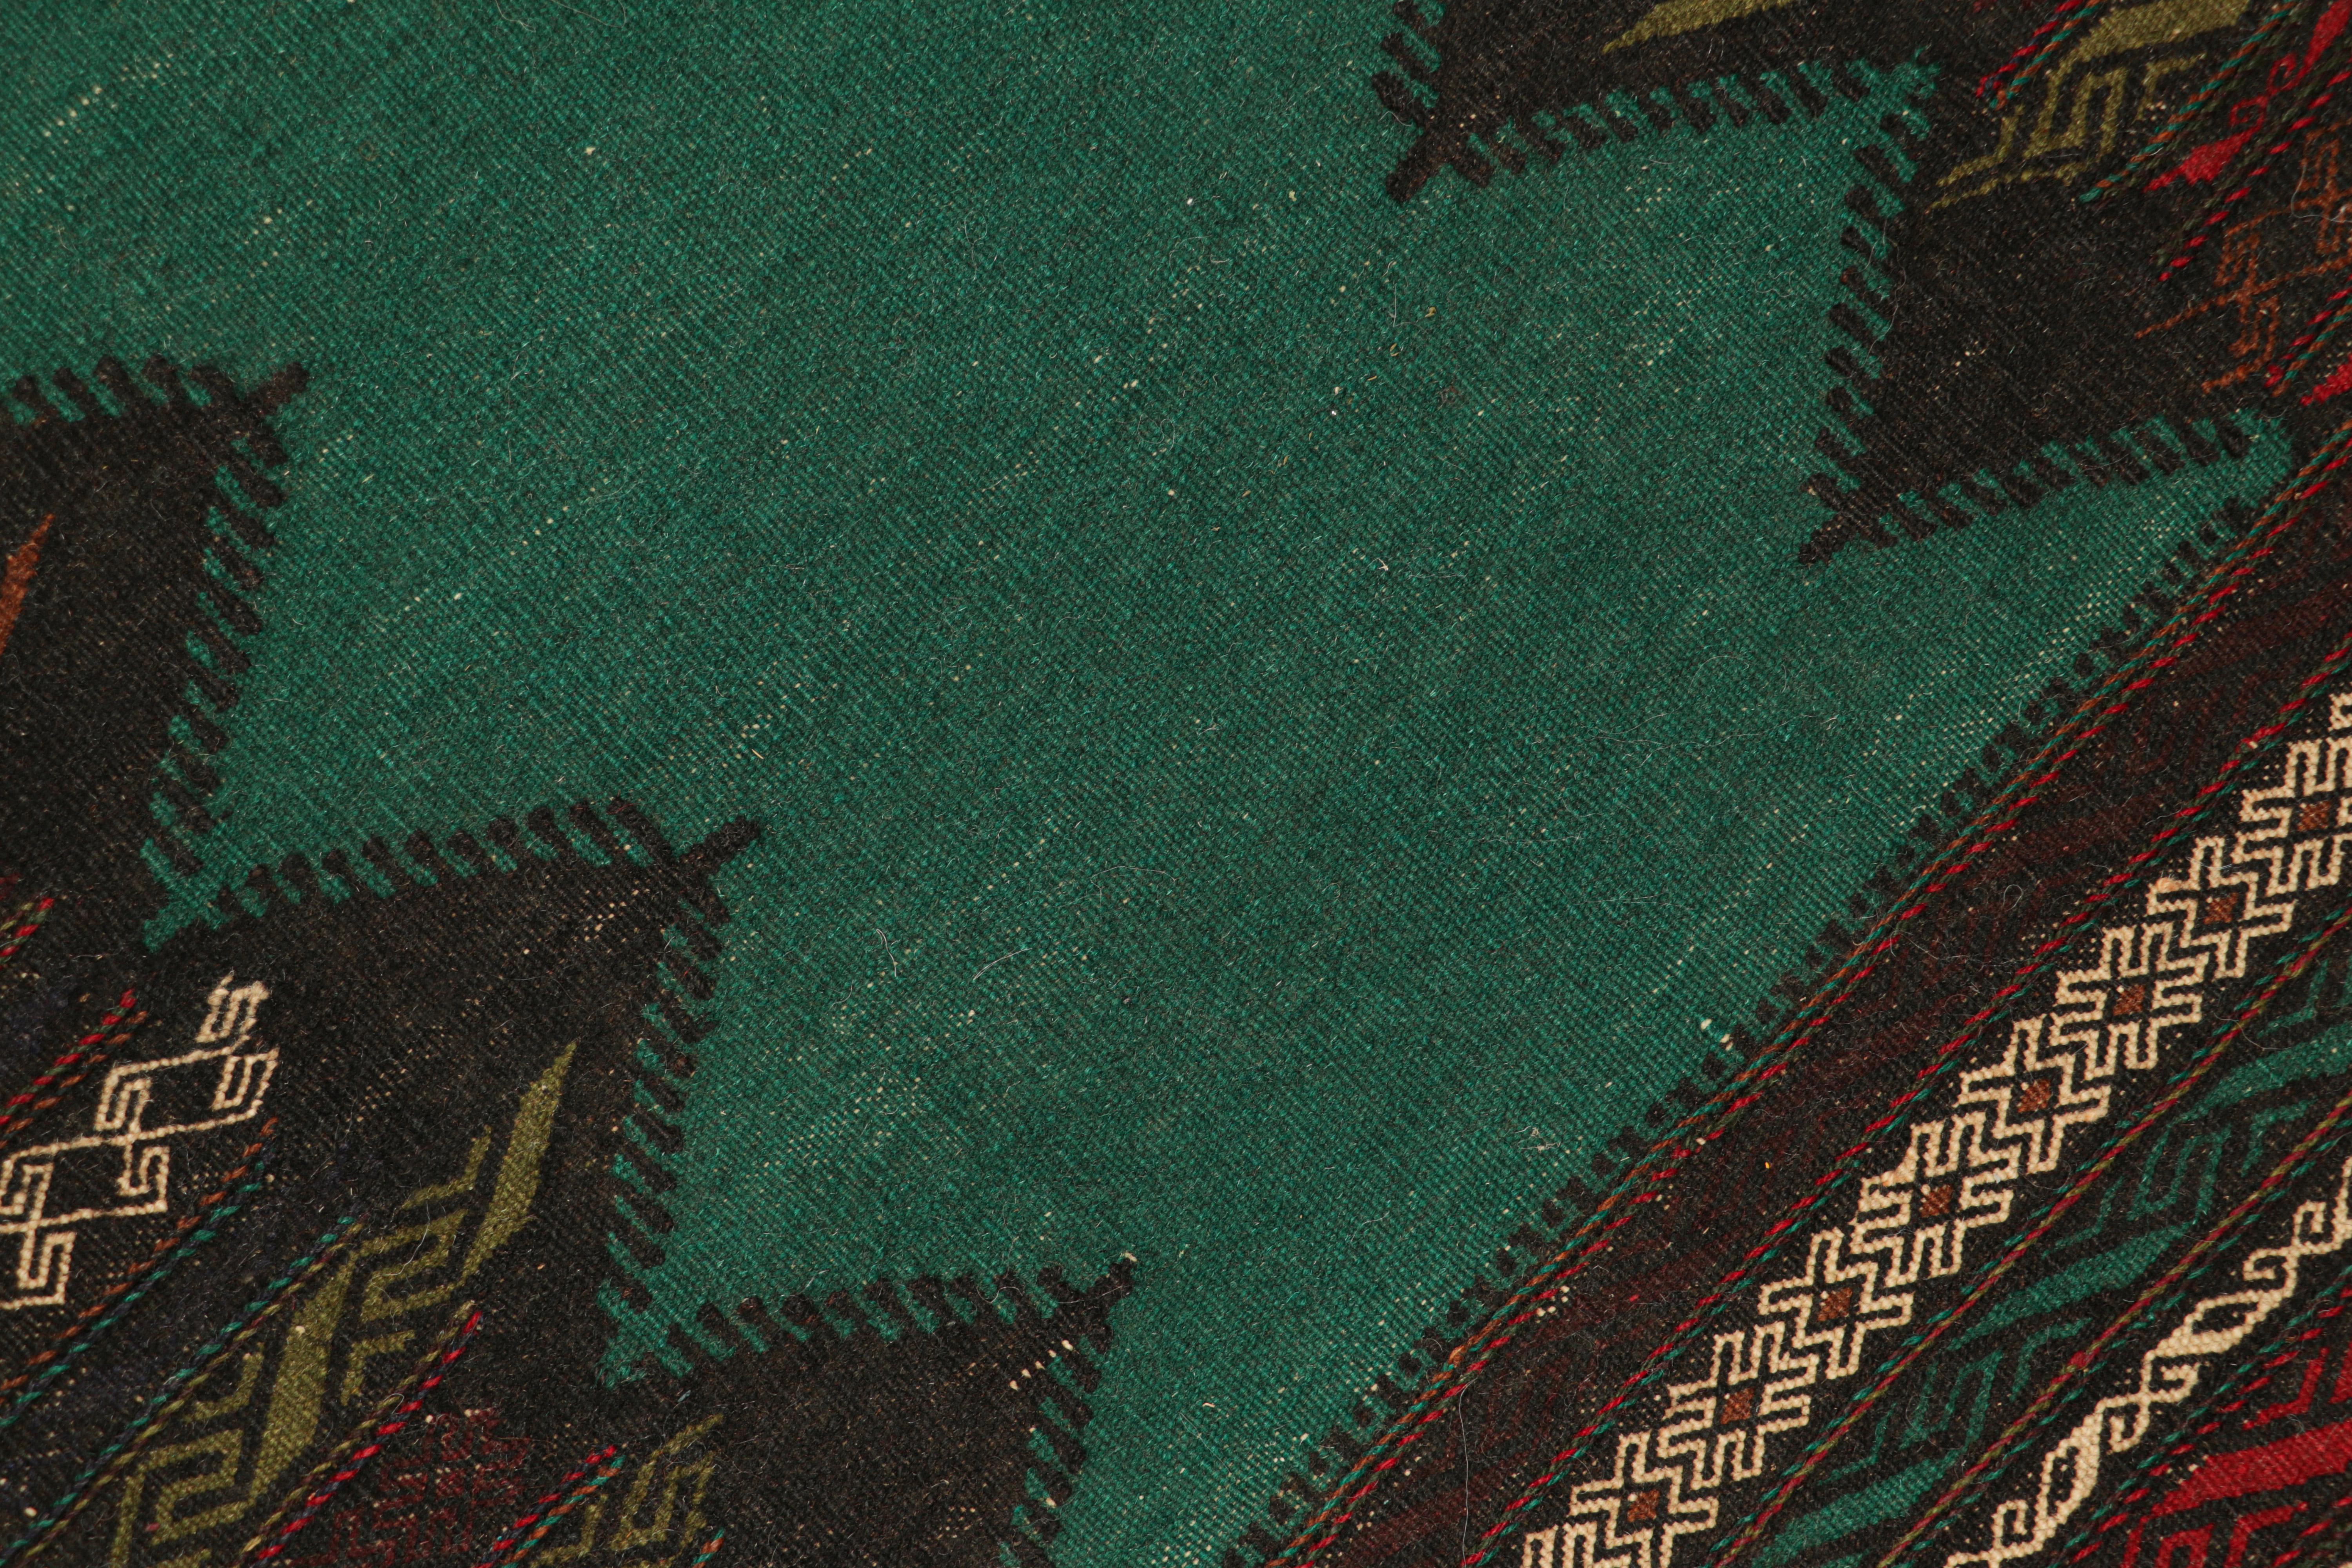 Handwoven in wool, circa 1950-1960, this 2×5 vintage Afghan tribal kilim, is a collectible tribal piece that may have been used as table covers in nomadic daily life, much similar to Persian Sofreh Kilims.

On the Design: 

Drawing on Afghan tribal